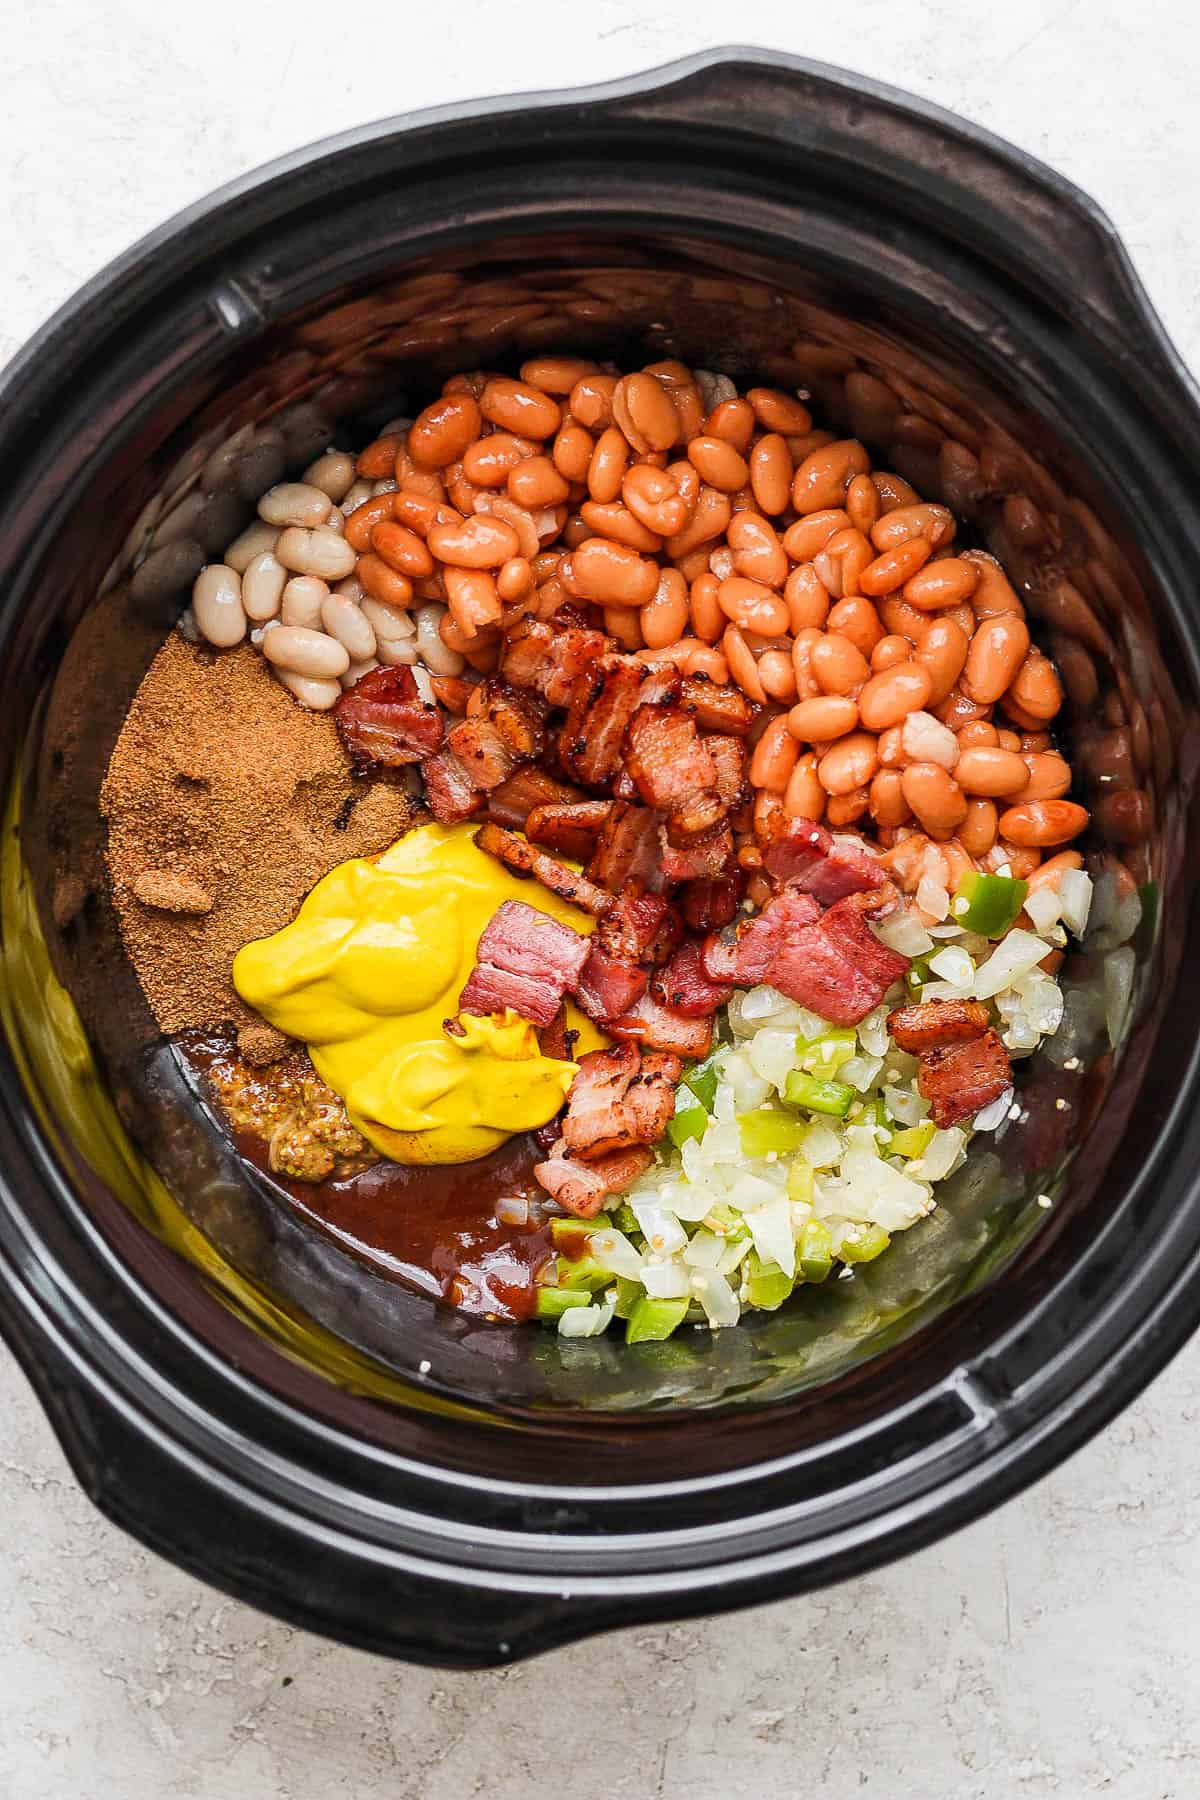 All of the baked beans ingredients in the slow cooker.